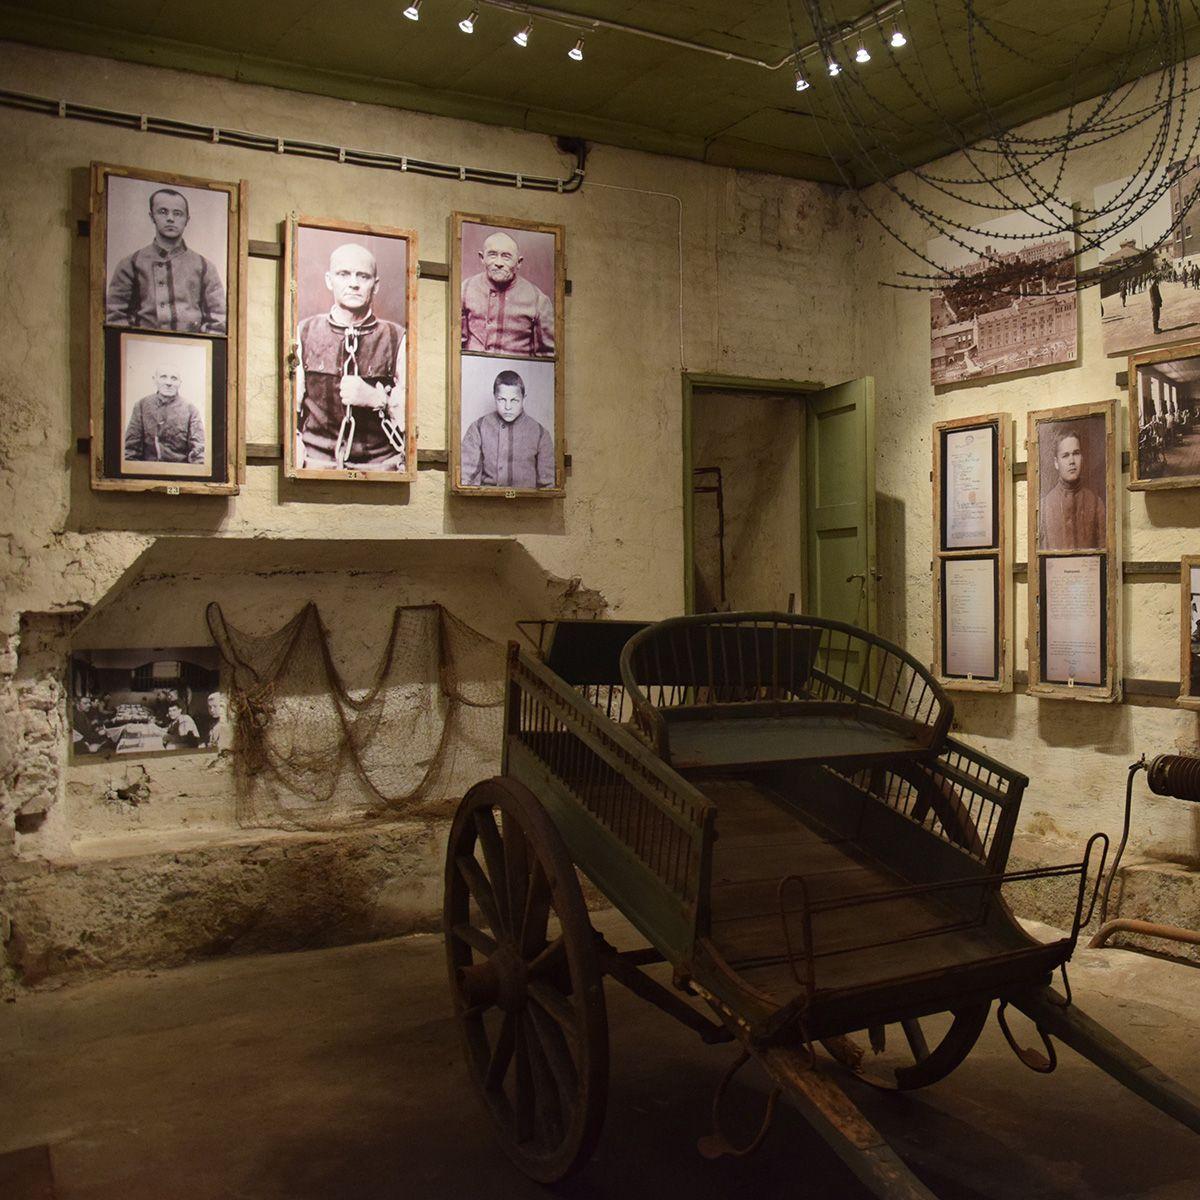 A room inside the Kakolanmäki Hill Museum, featuring photographs on the wall and chains hanging from the ceiling.